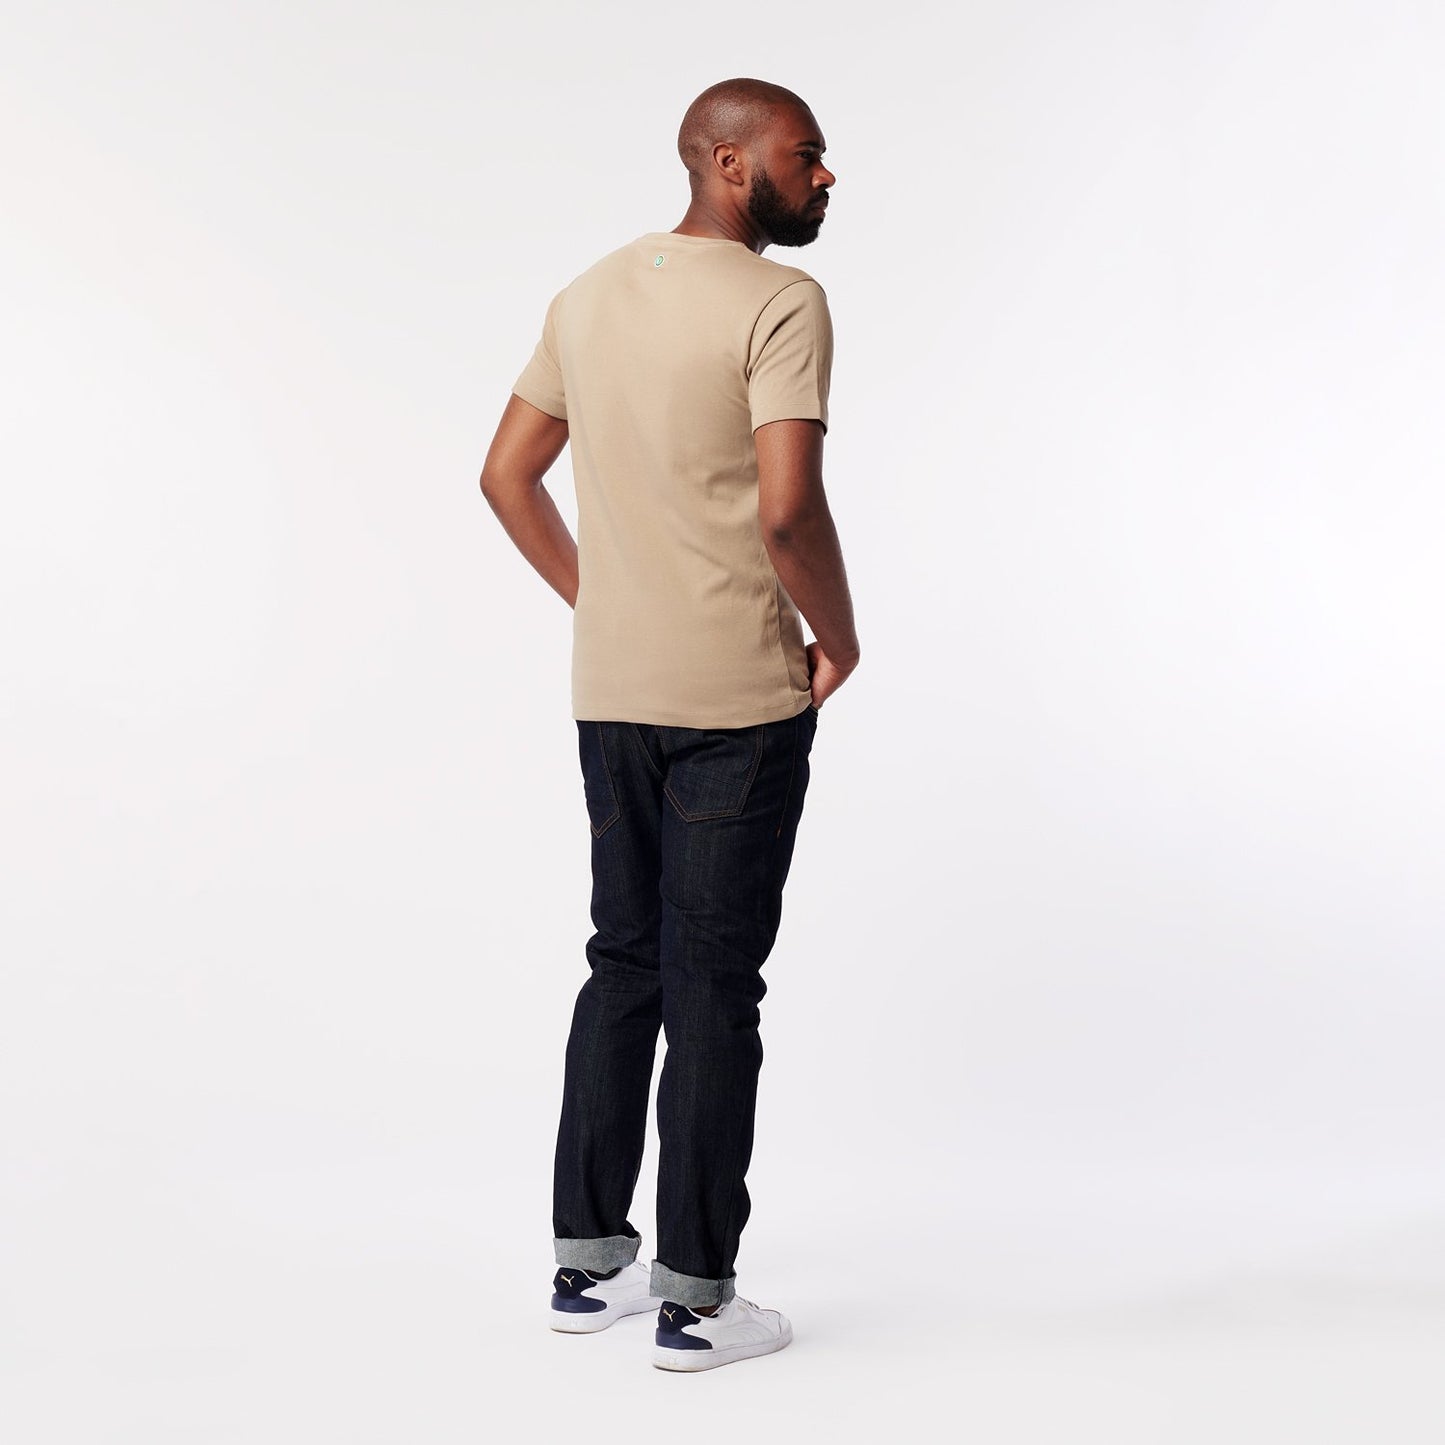 T-shirt - Earth - Round Neck - Sand